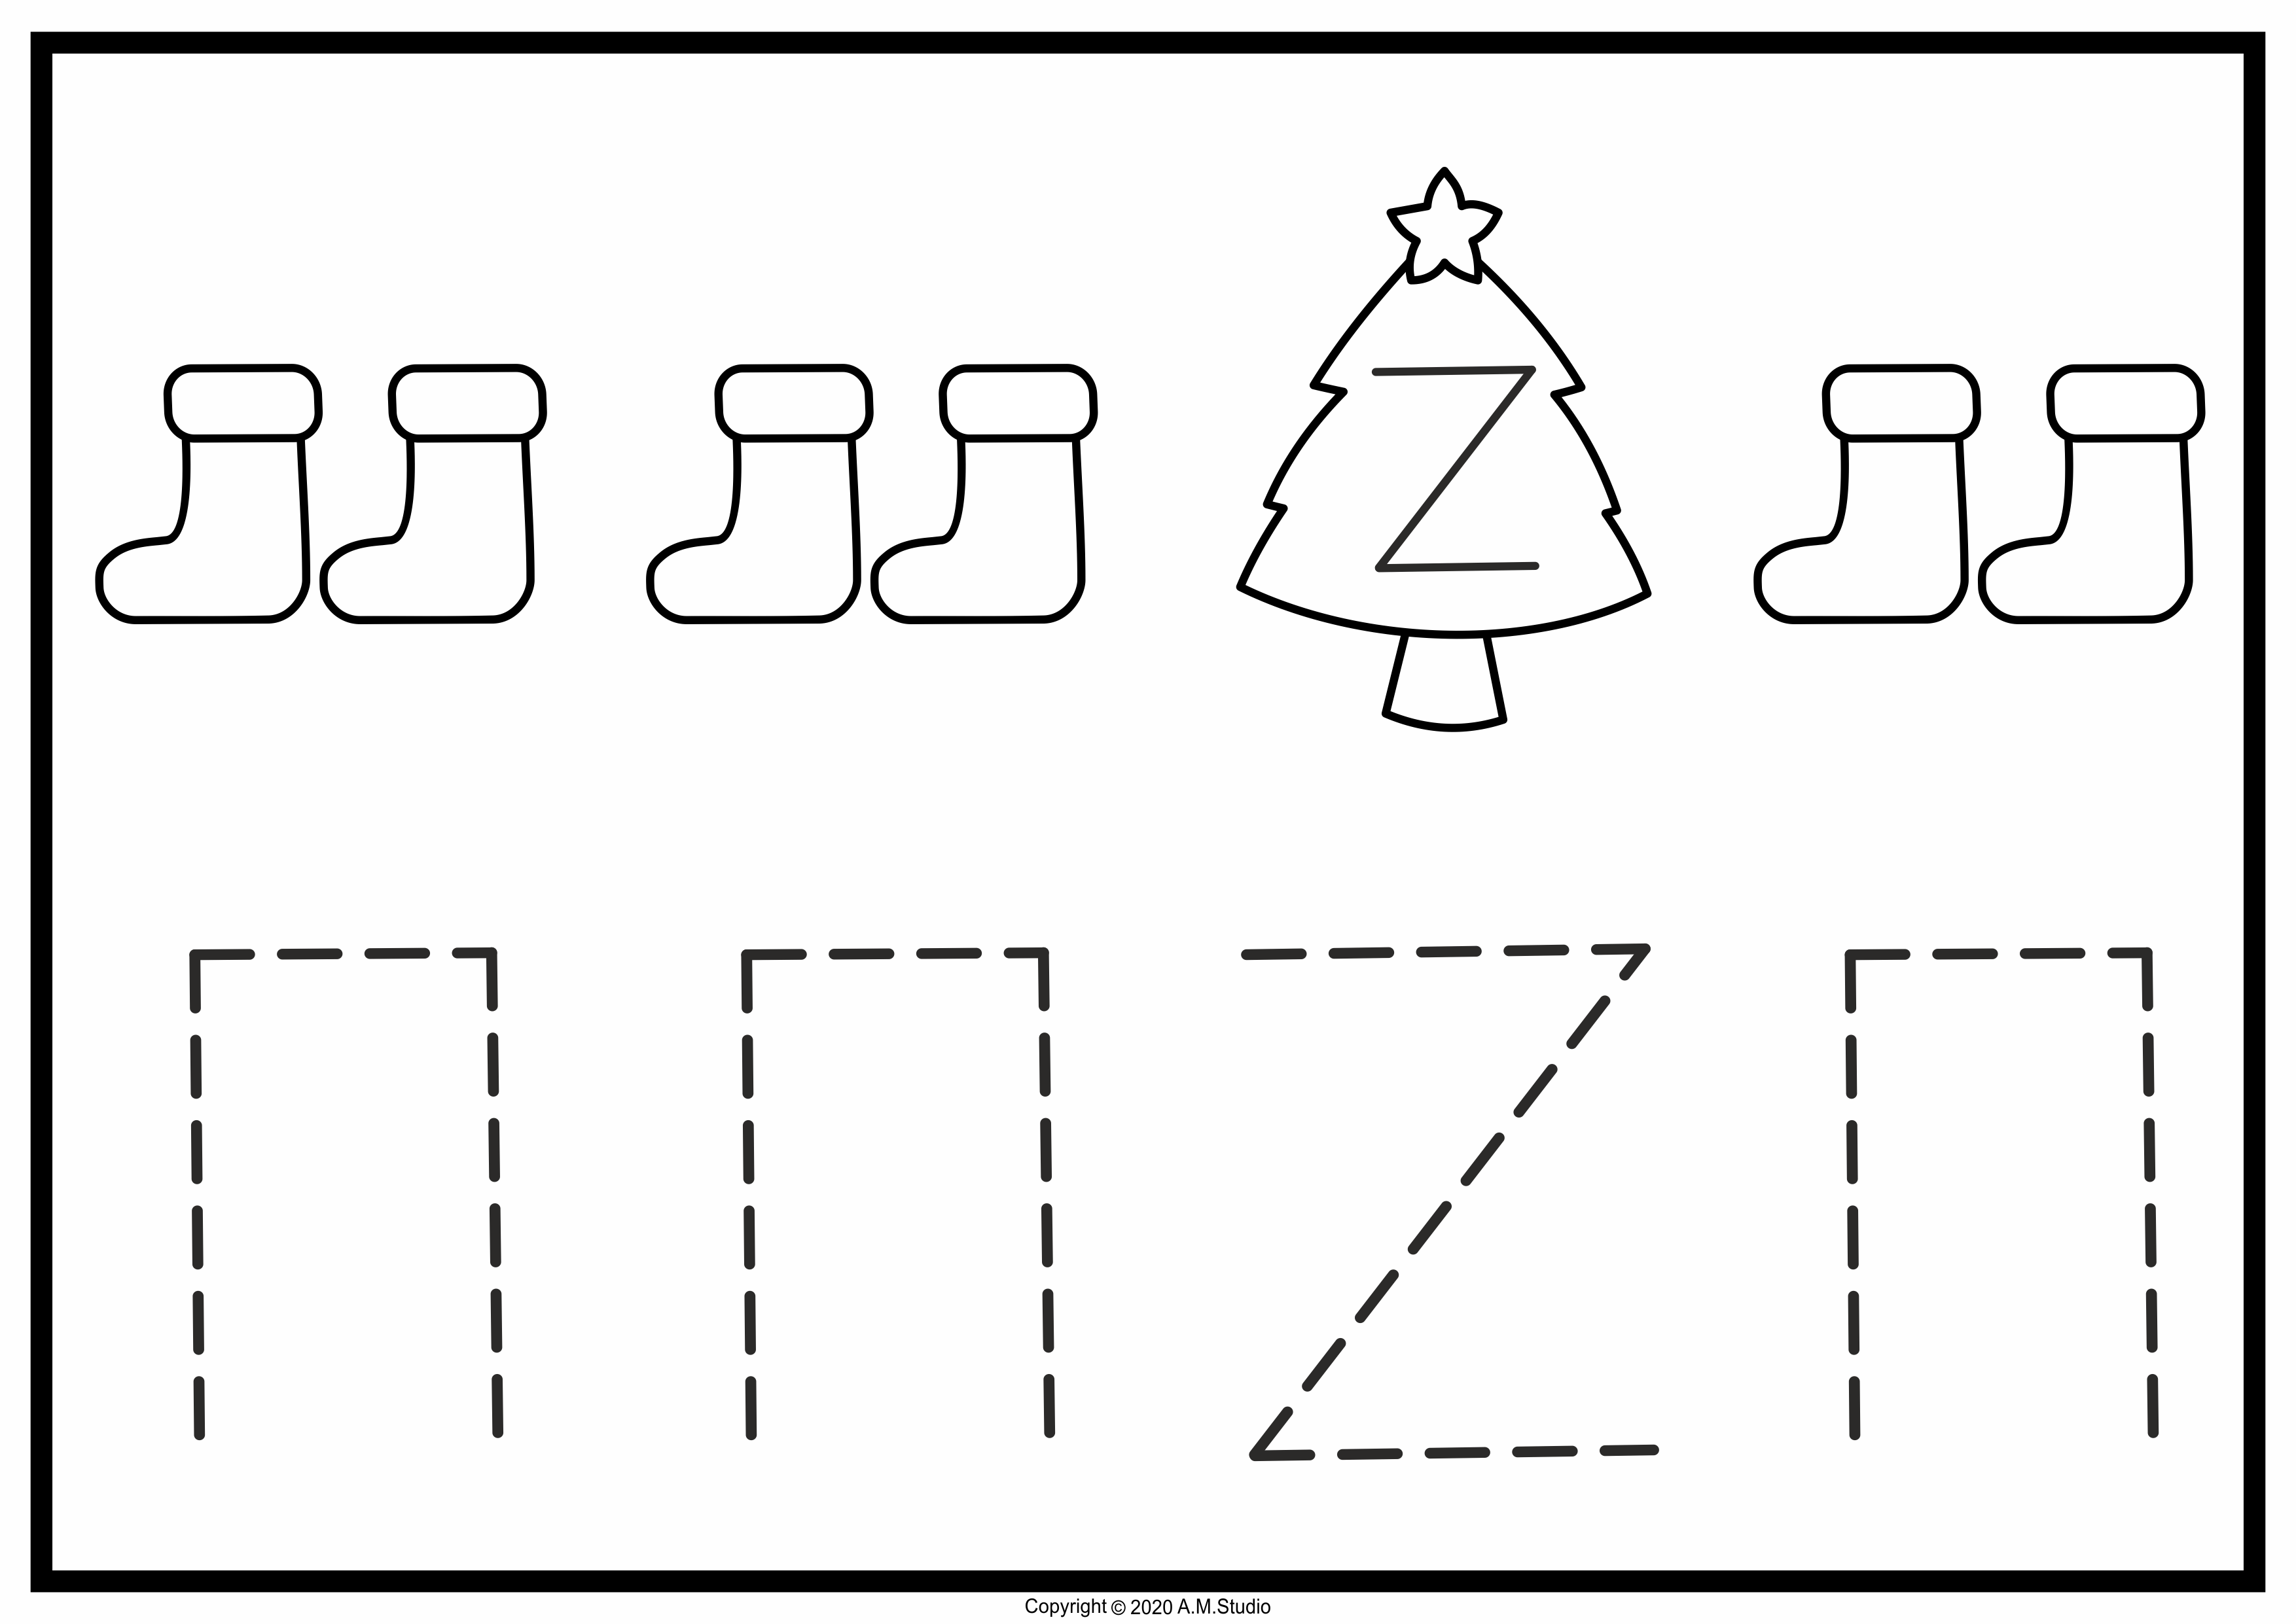 Color, Trace, Clap! Christmas Music Rhythm Activities {Ta, Ti-Ti, Rest} (img # 1)